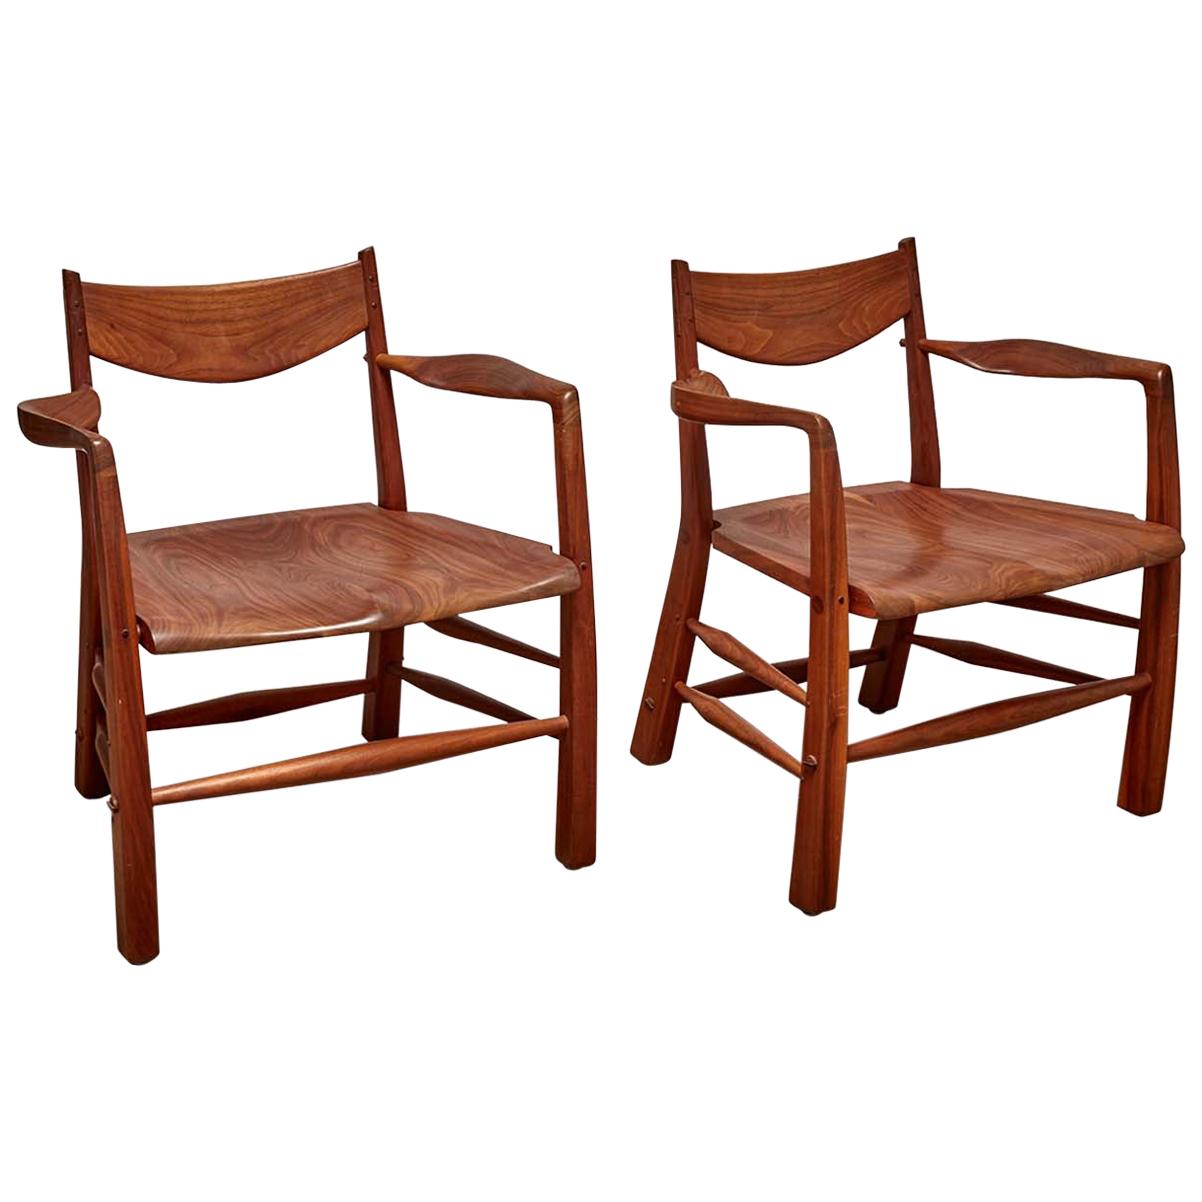 Pair of Sculptural Walnut Chairs by Richard Patterson